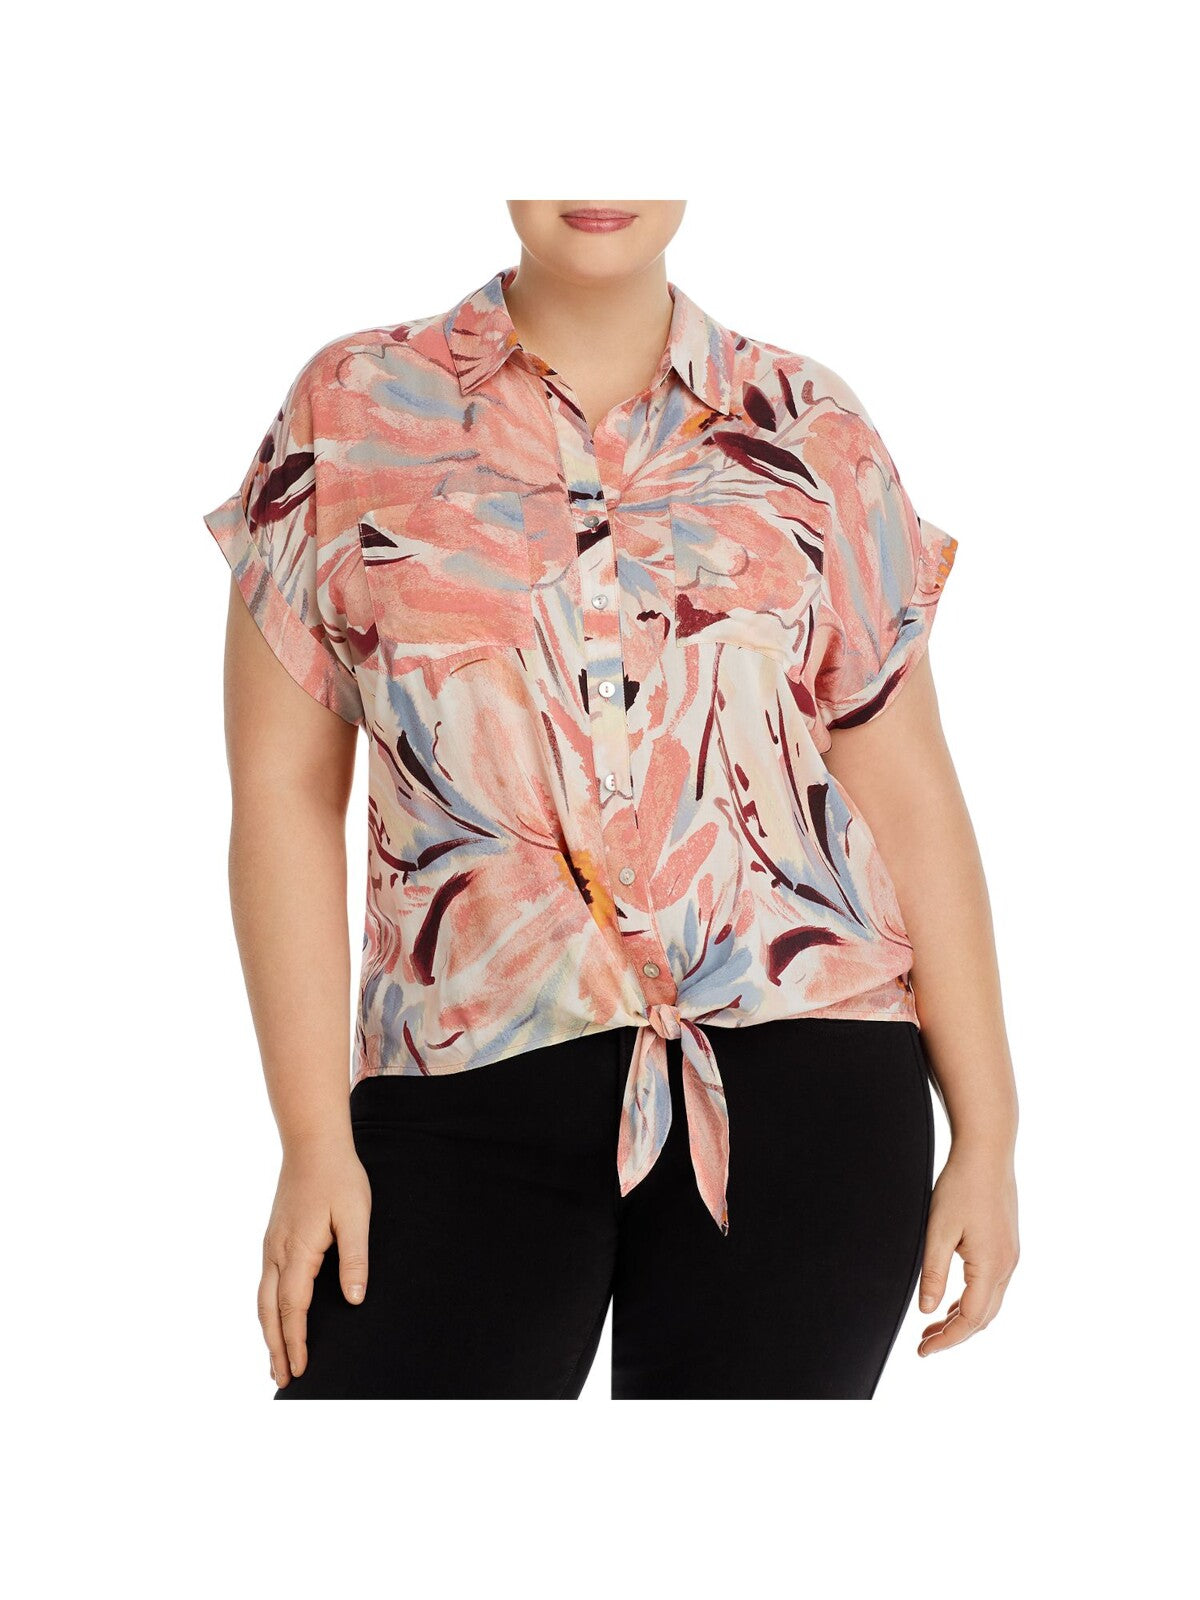 CUPIO BLUSH Womens Pink Pocketed Rolled Cuffs Curved Tie Hem Printed Short Sleeve Button Up Top Plus 1X